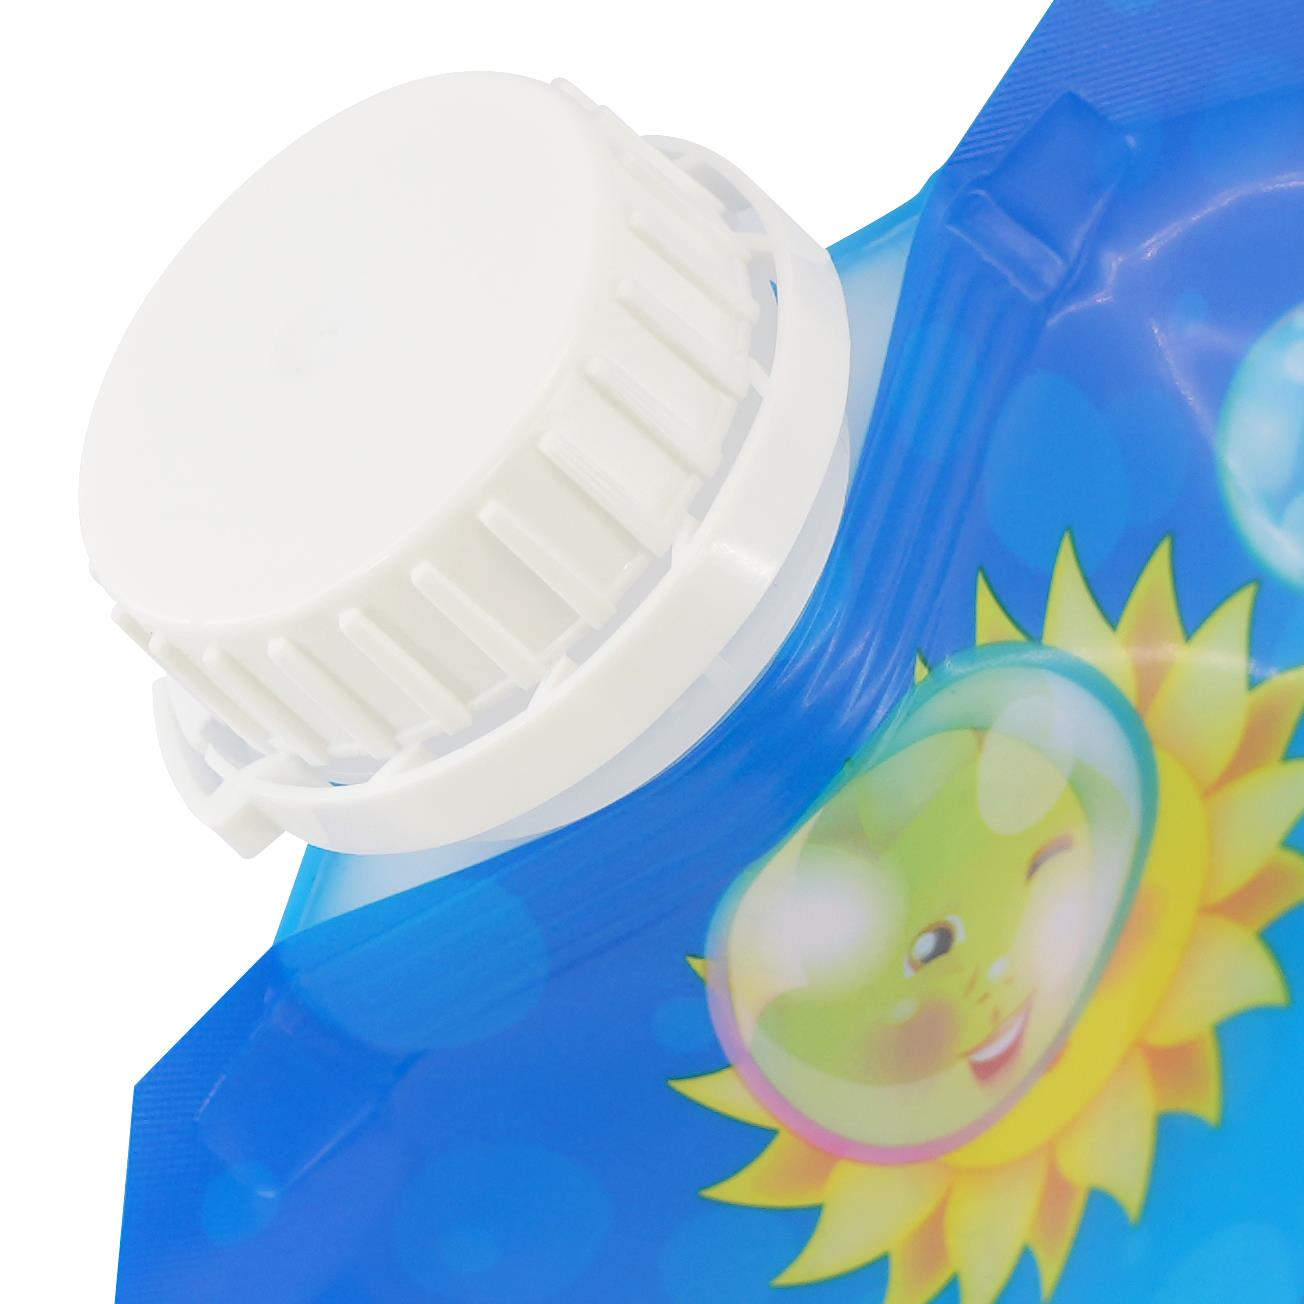 Bubble Blow Maker Concentrate Refill Liquid 200 ML by The Magic Toy Shop - The Magic Toy Shop